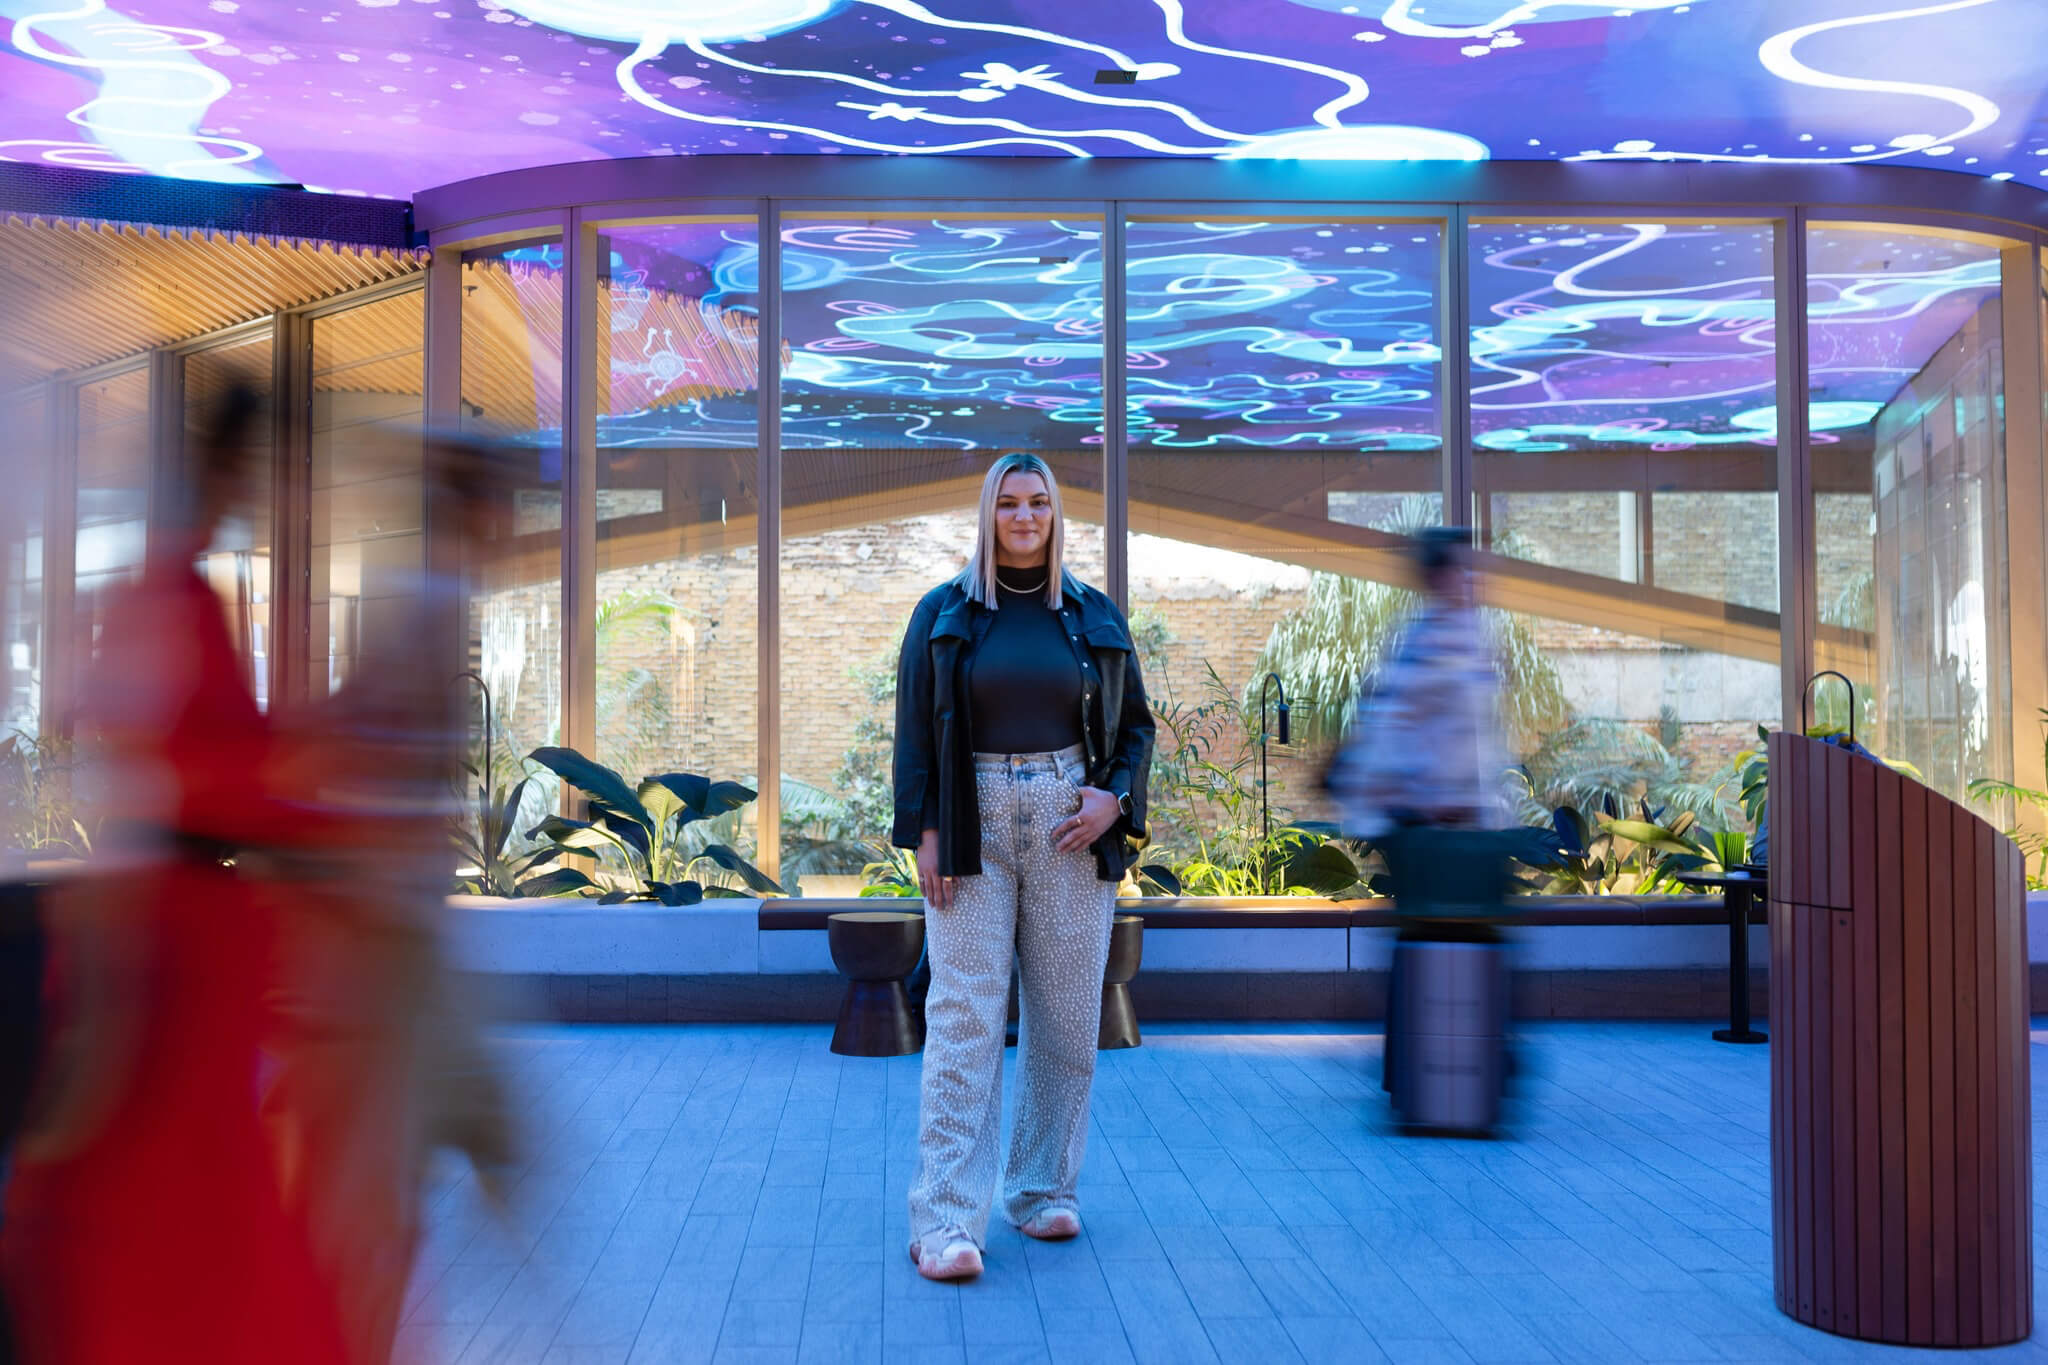 Photo of artist Rachael Sara Mirvac Heritage Lanes commercial lobby foyer in Brisbane Australia showing digital placemaking art screen with vibrant blue indigenous Australian aboriginal artwork created by artist Rachael Sarra in partnership with VANDAL.